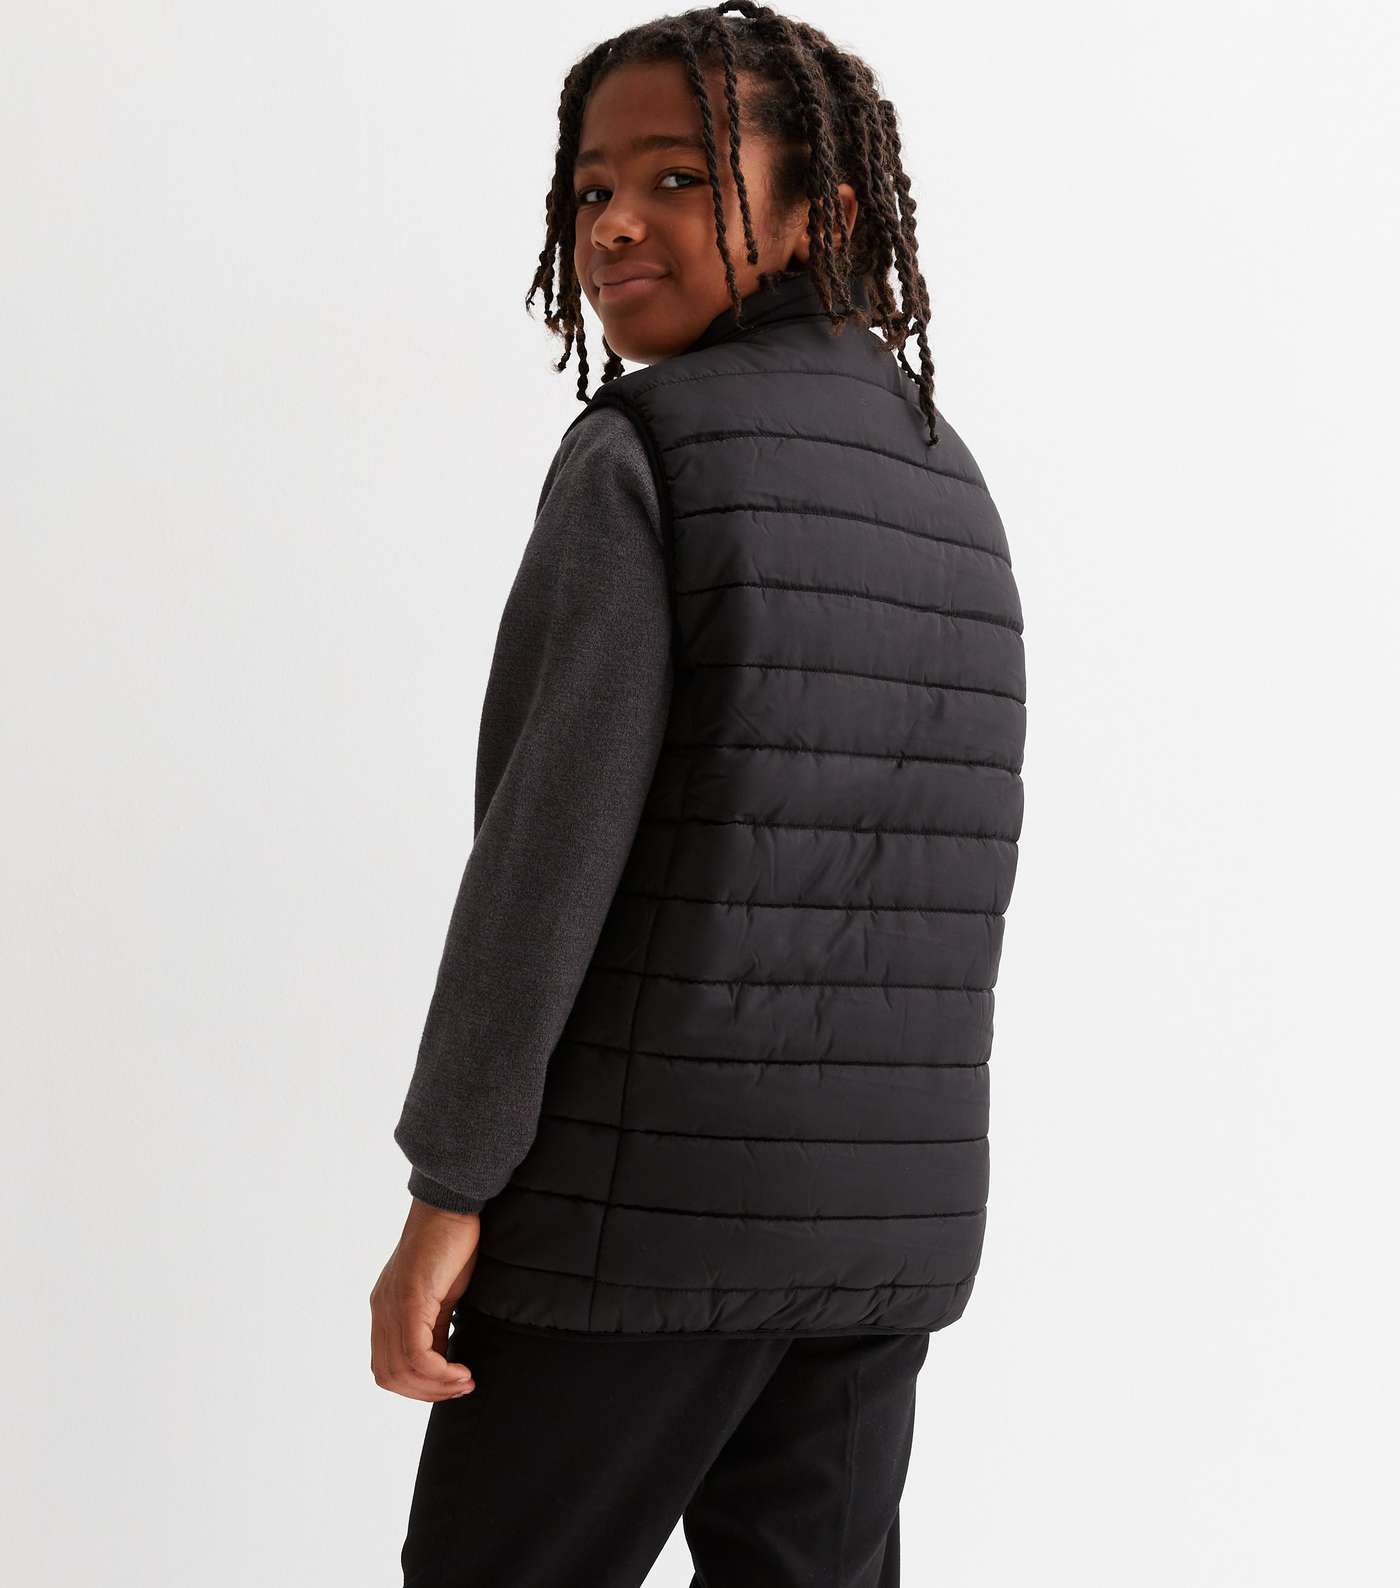 Boys Black Quilted High Neck Gilet Image 4